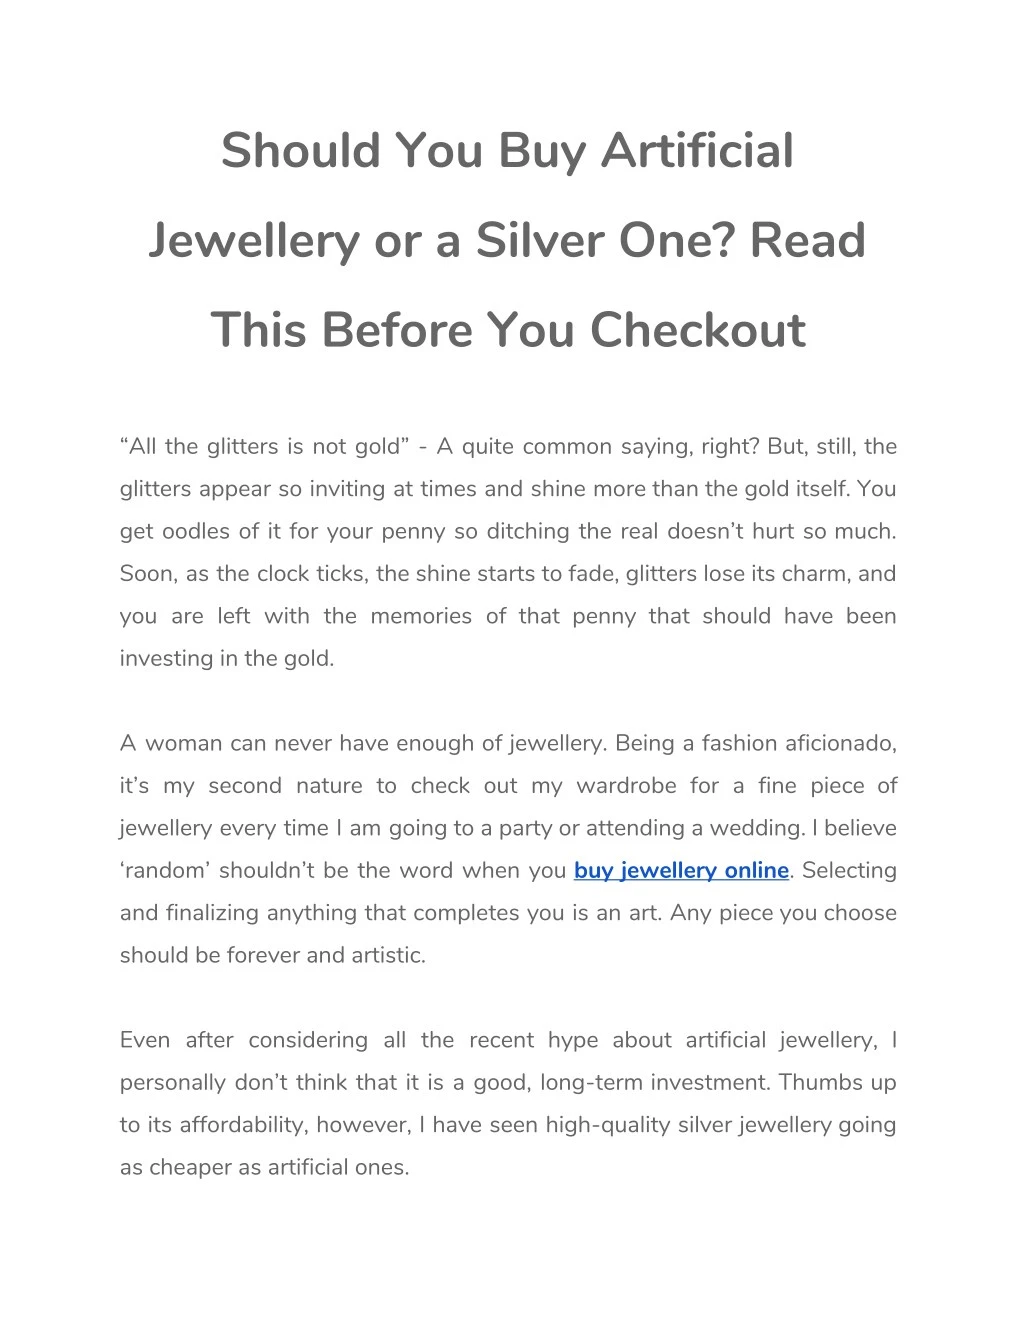 should you buy artificial jewellery or a silver